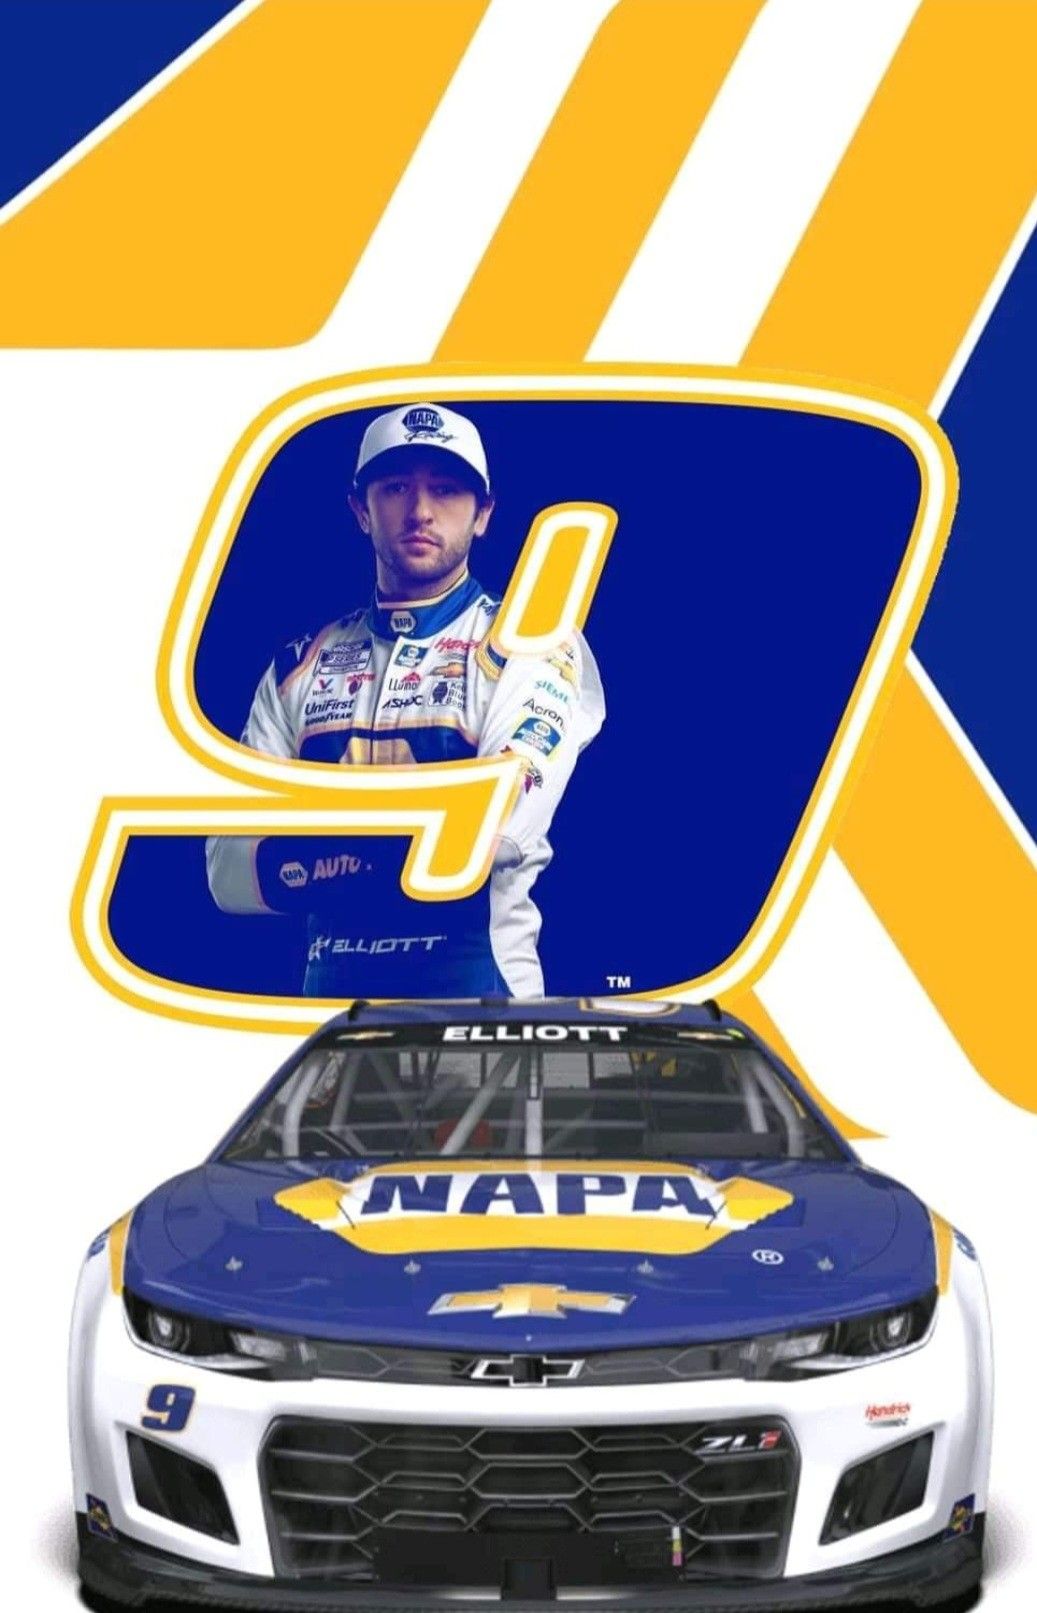 A path towards the championship has now opened for Chase Elliott